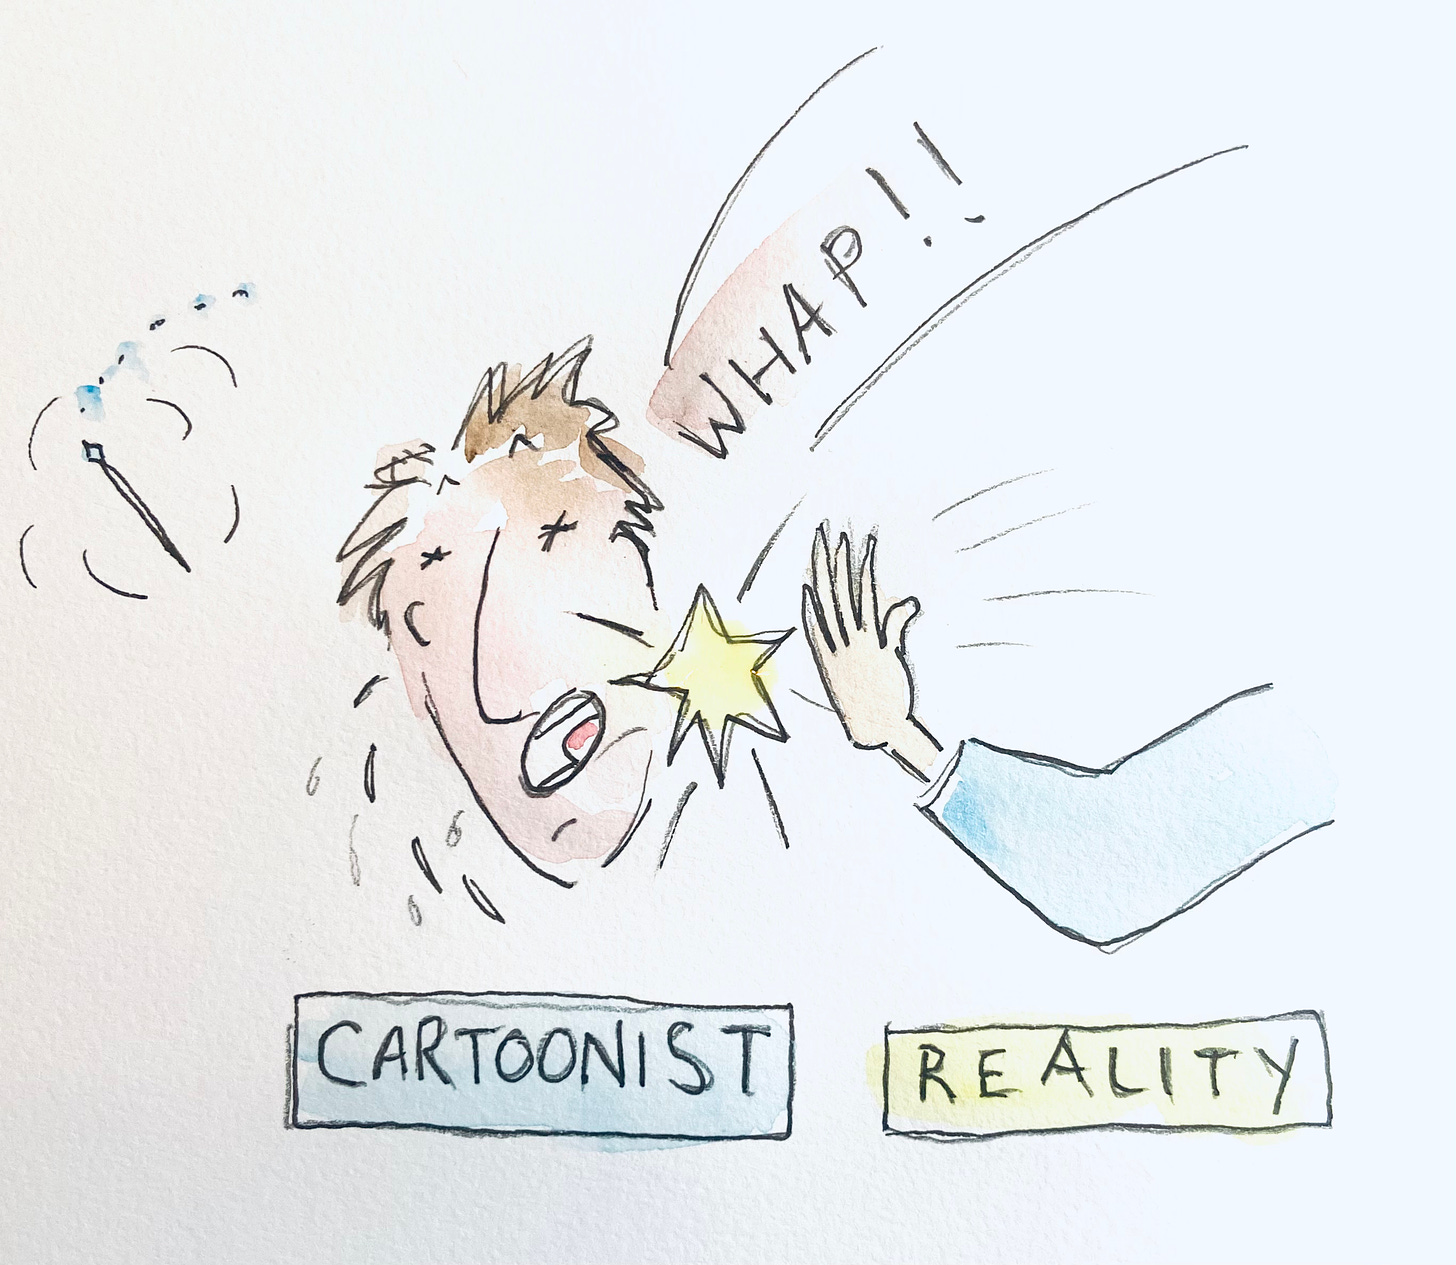 Cartoonist gets hit in the face by reality